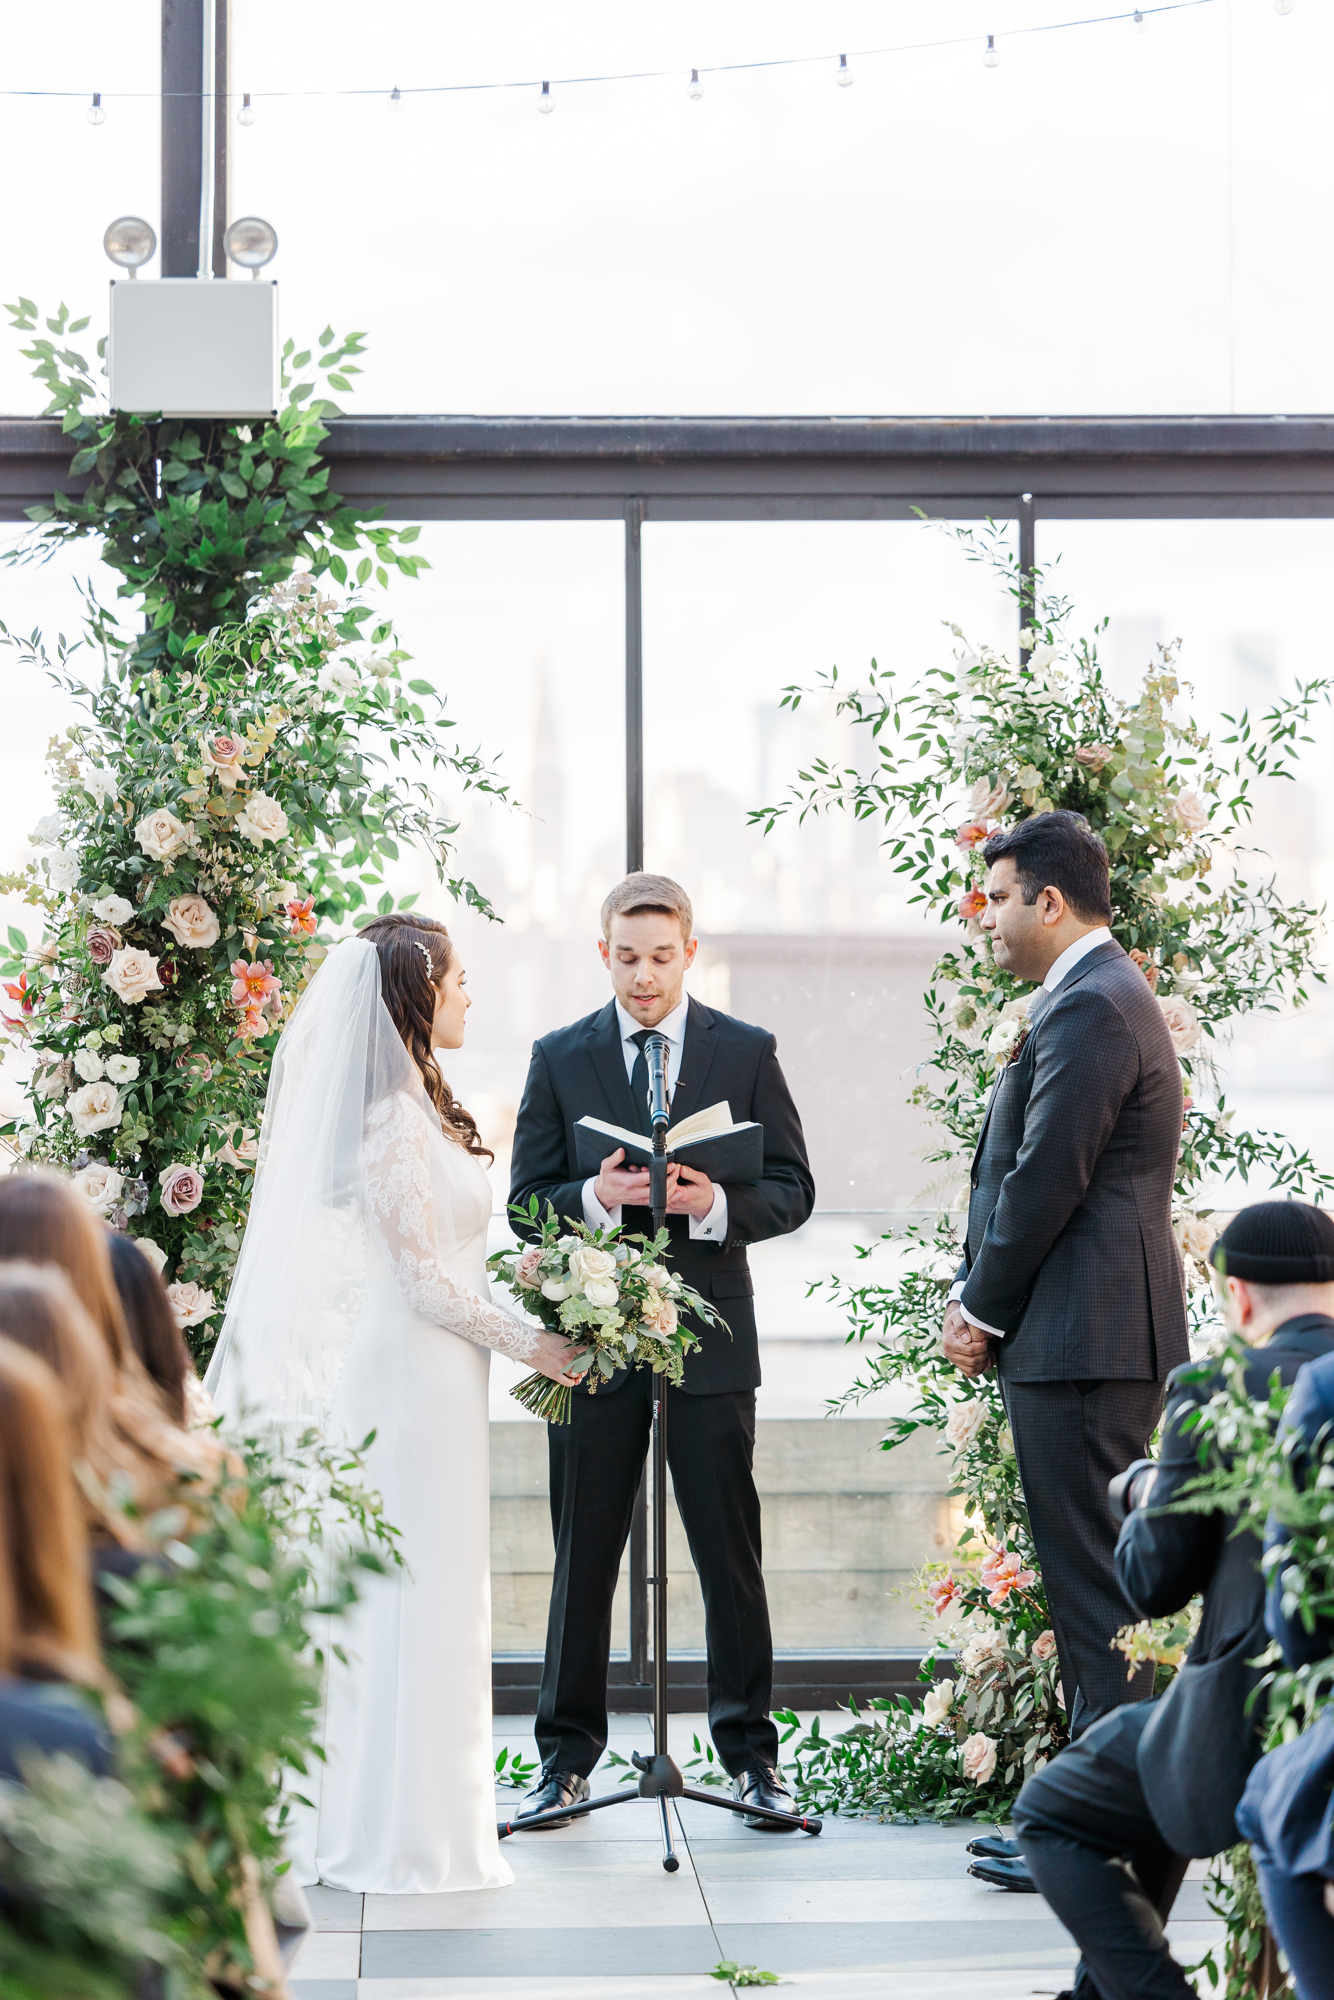 Magical Brooklyn Wedding Photography at 74Wythe with Rooftop NYC Views